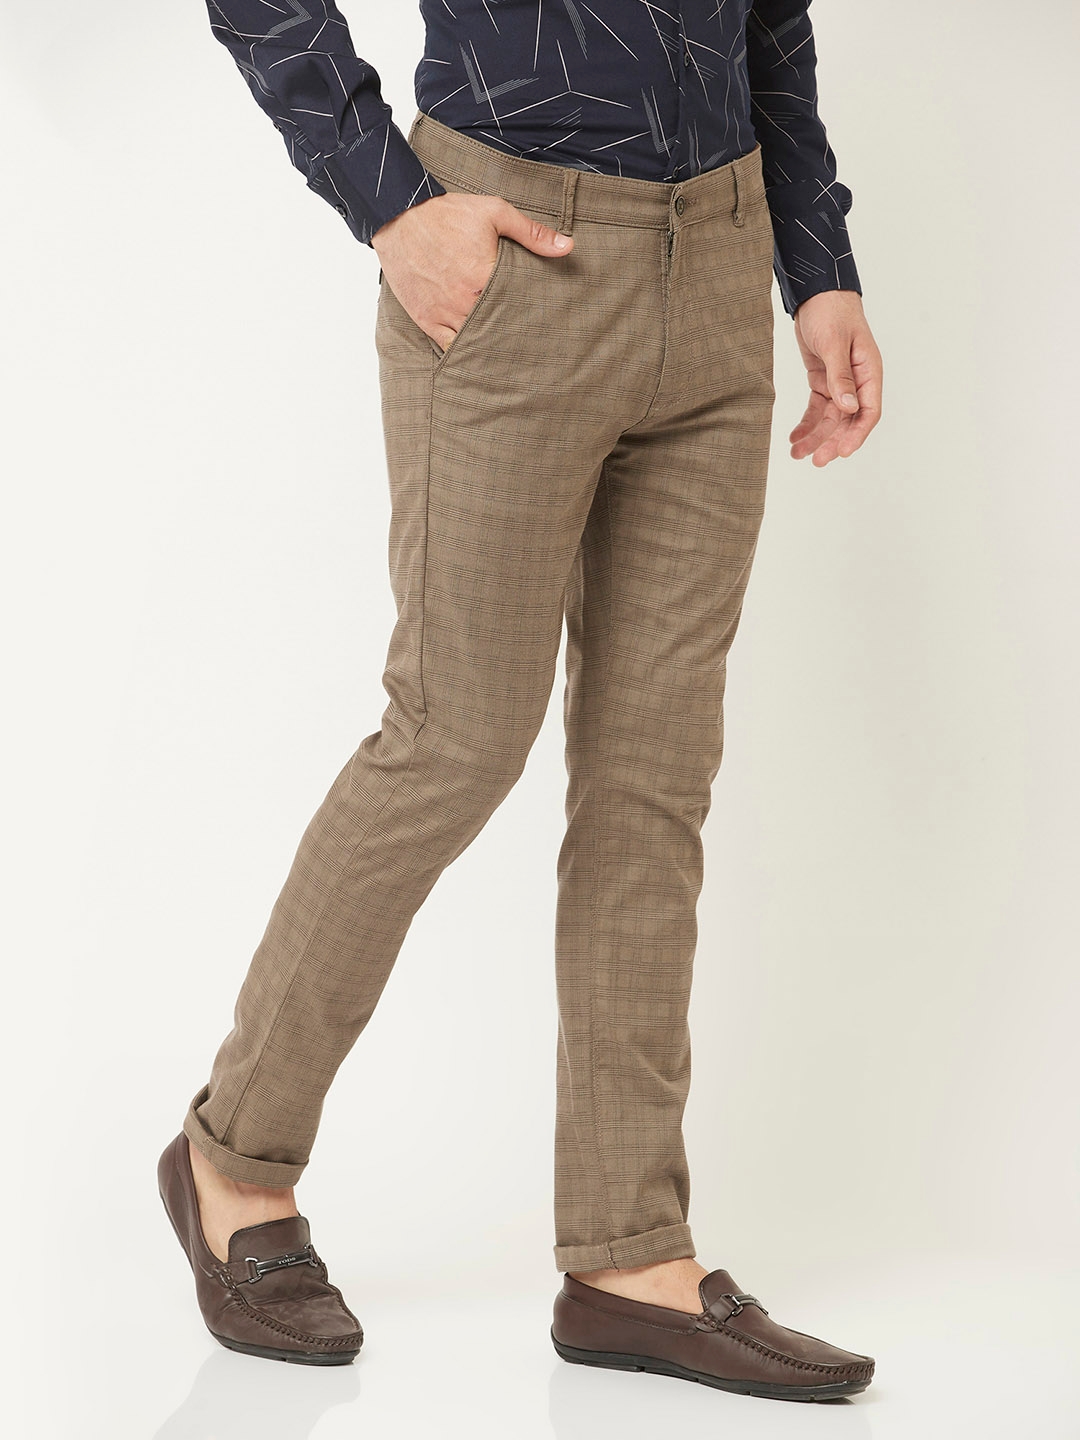 Buy Crimsoune Club Men's Olive Trousers(28) at Amazon.in